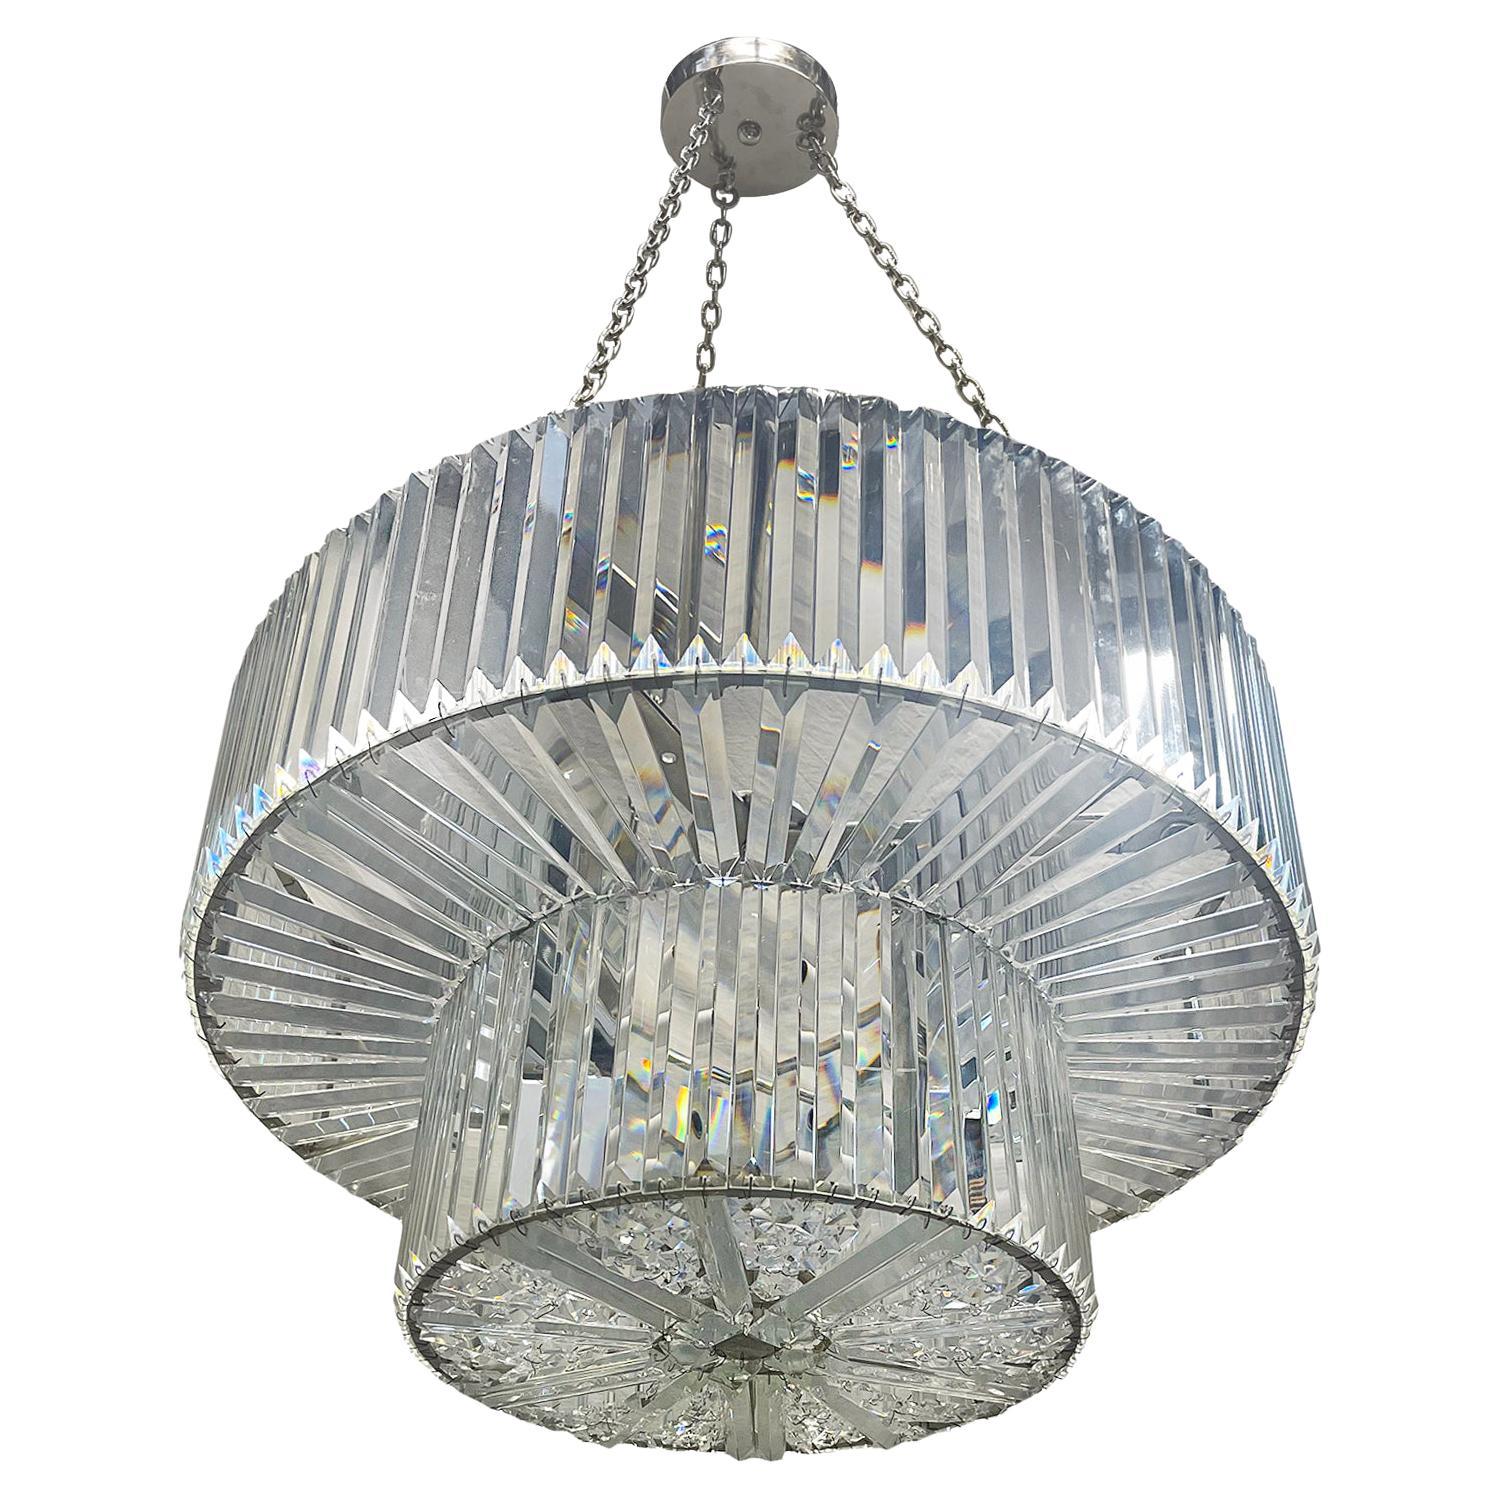 Pair of Moderne Crystal Light Fixtures, Sold Individually